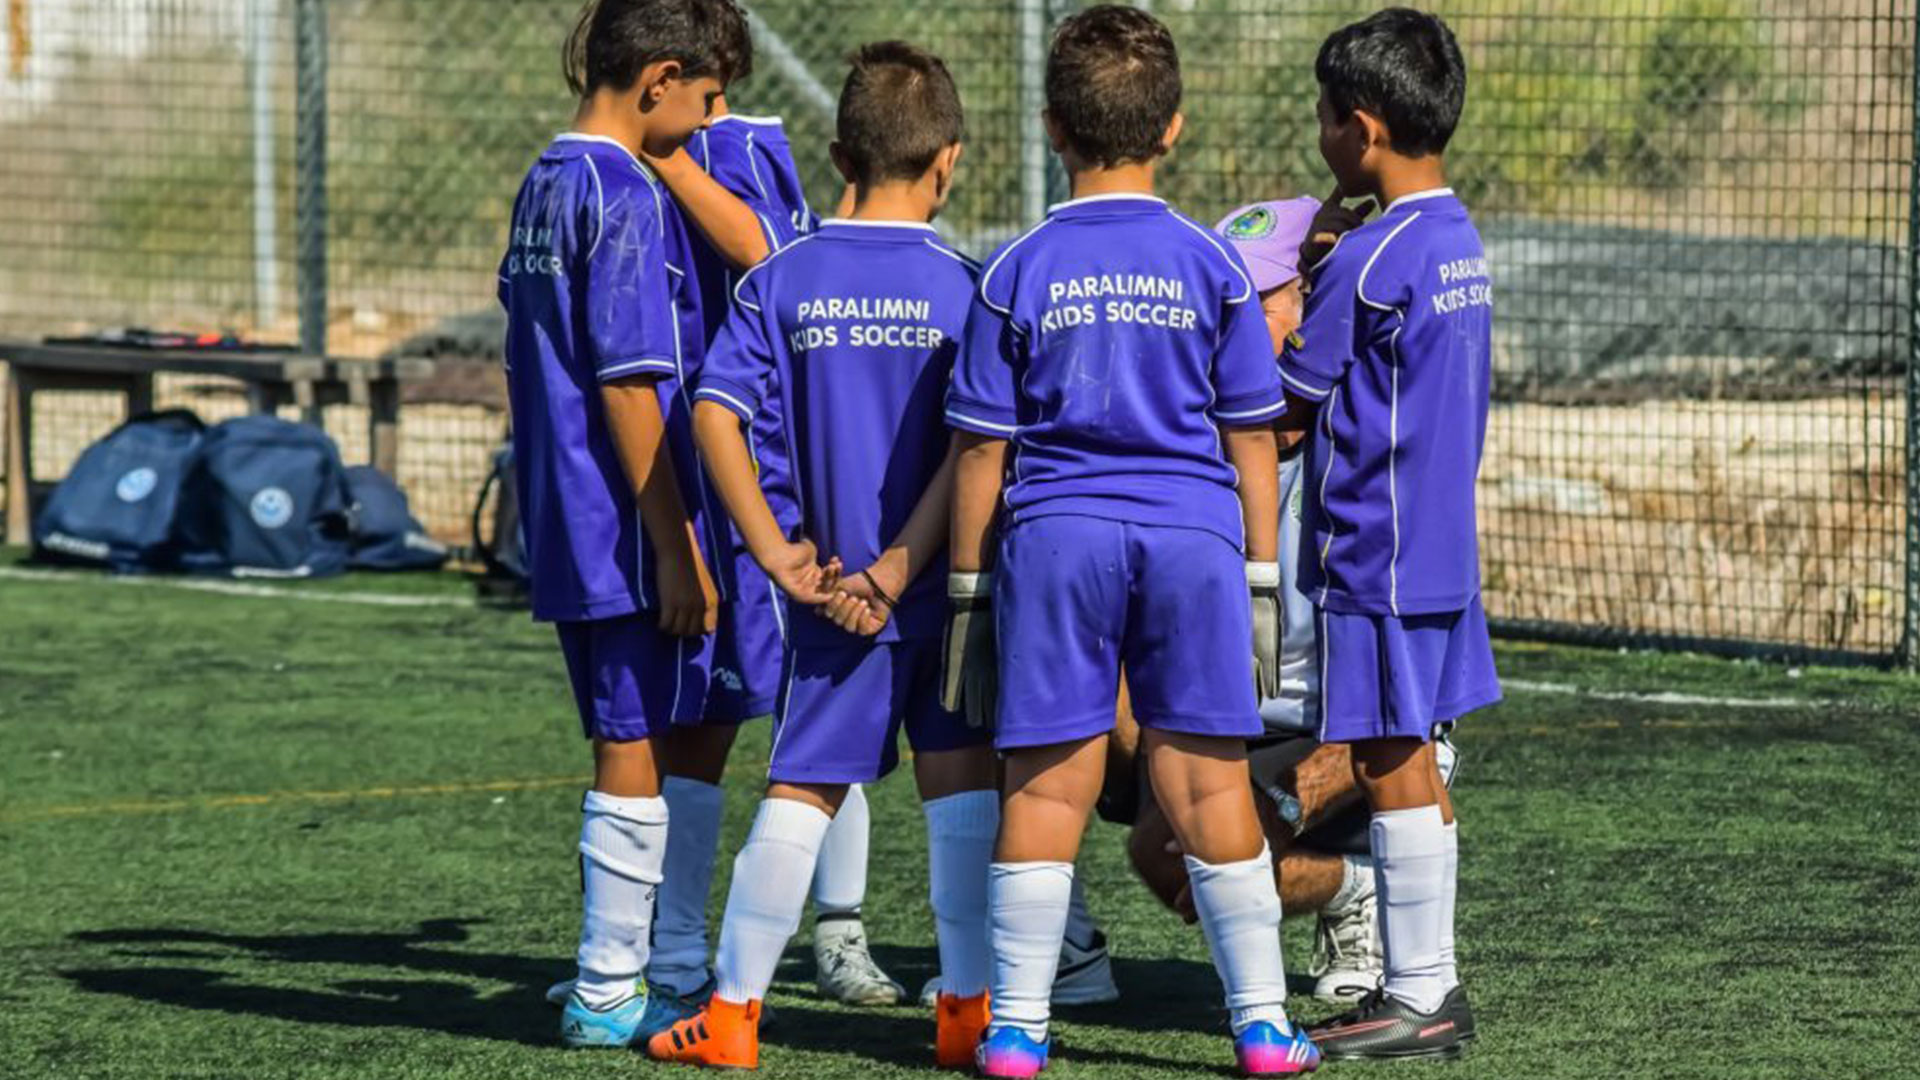 Young children wearing football kits having a huddle on the football pitch